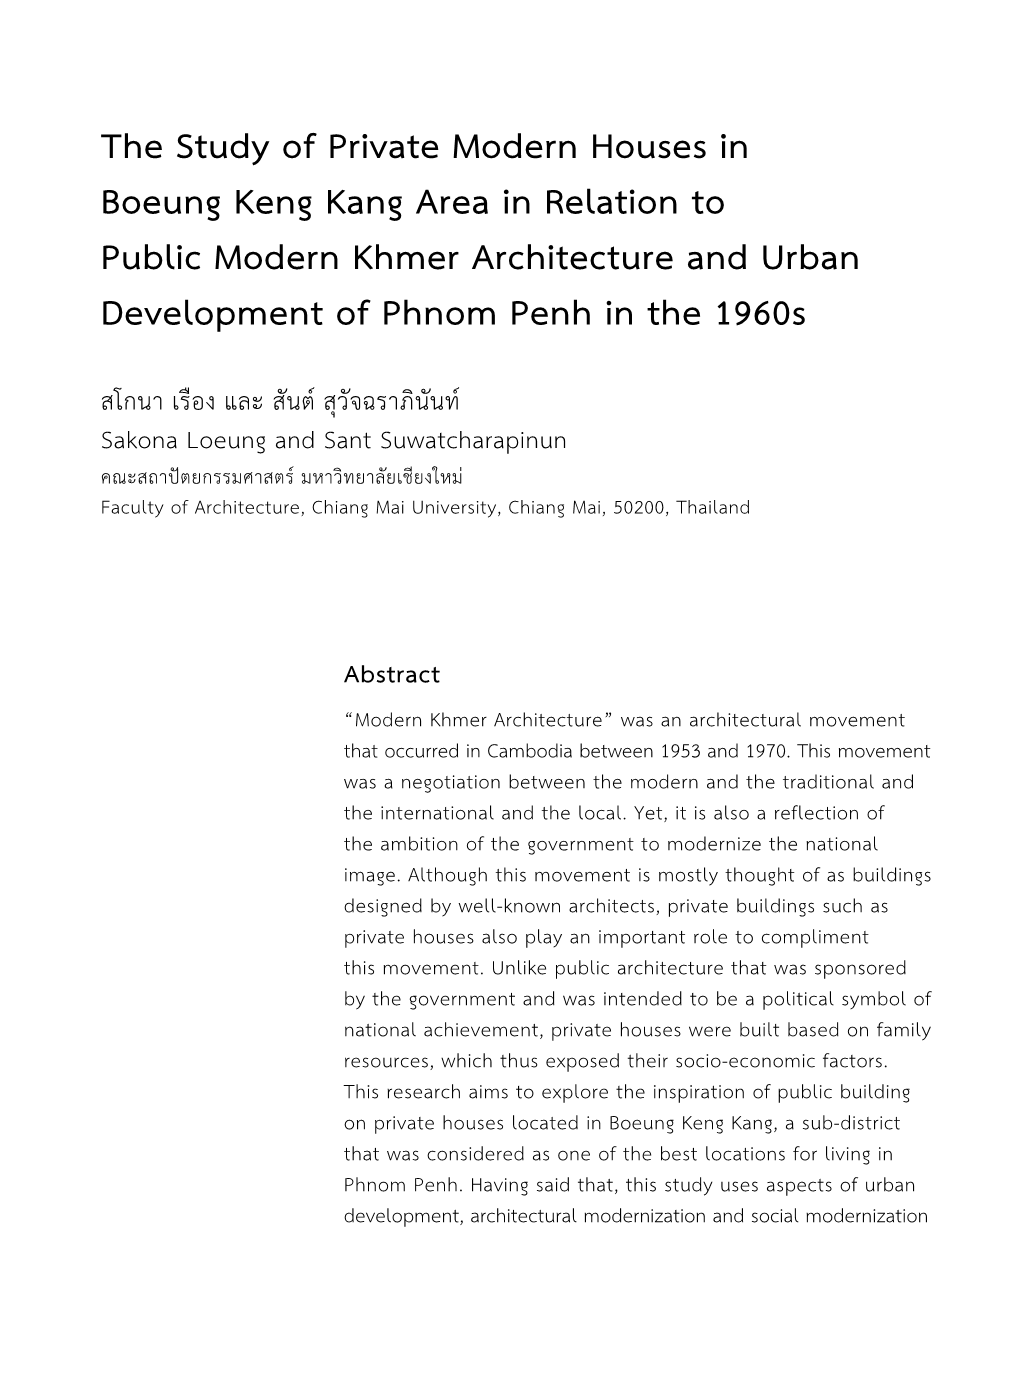 The Study of Private Modern Houses in Boeung Keng Kang Area in Relation to Public Modern Khmer Architecture and Urban Development of Phnom Penh in the 1960S